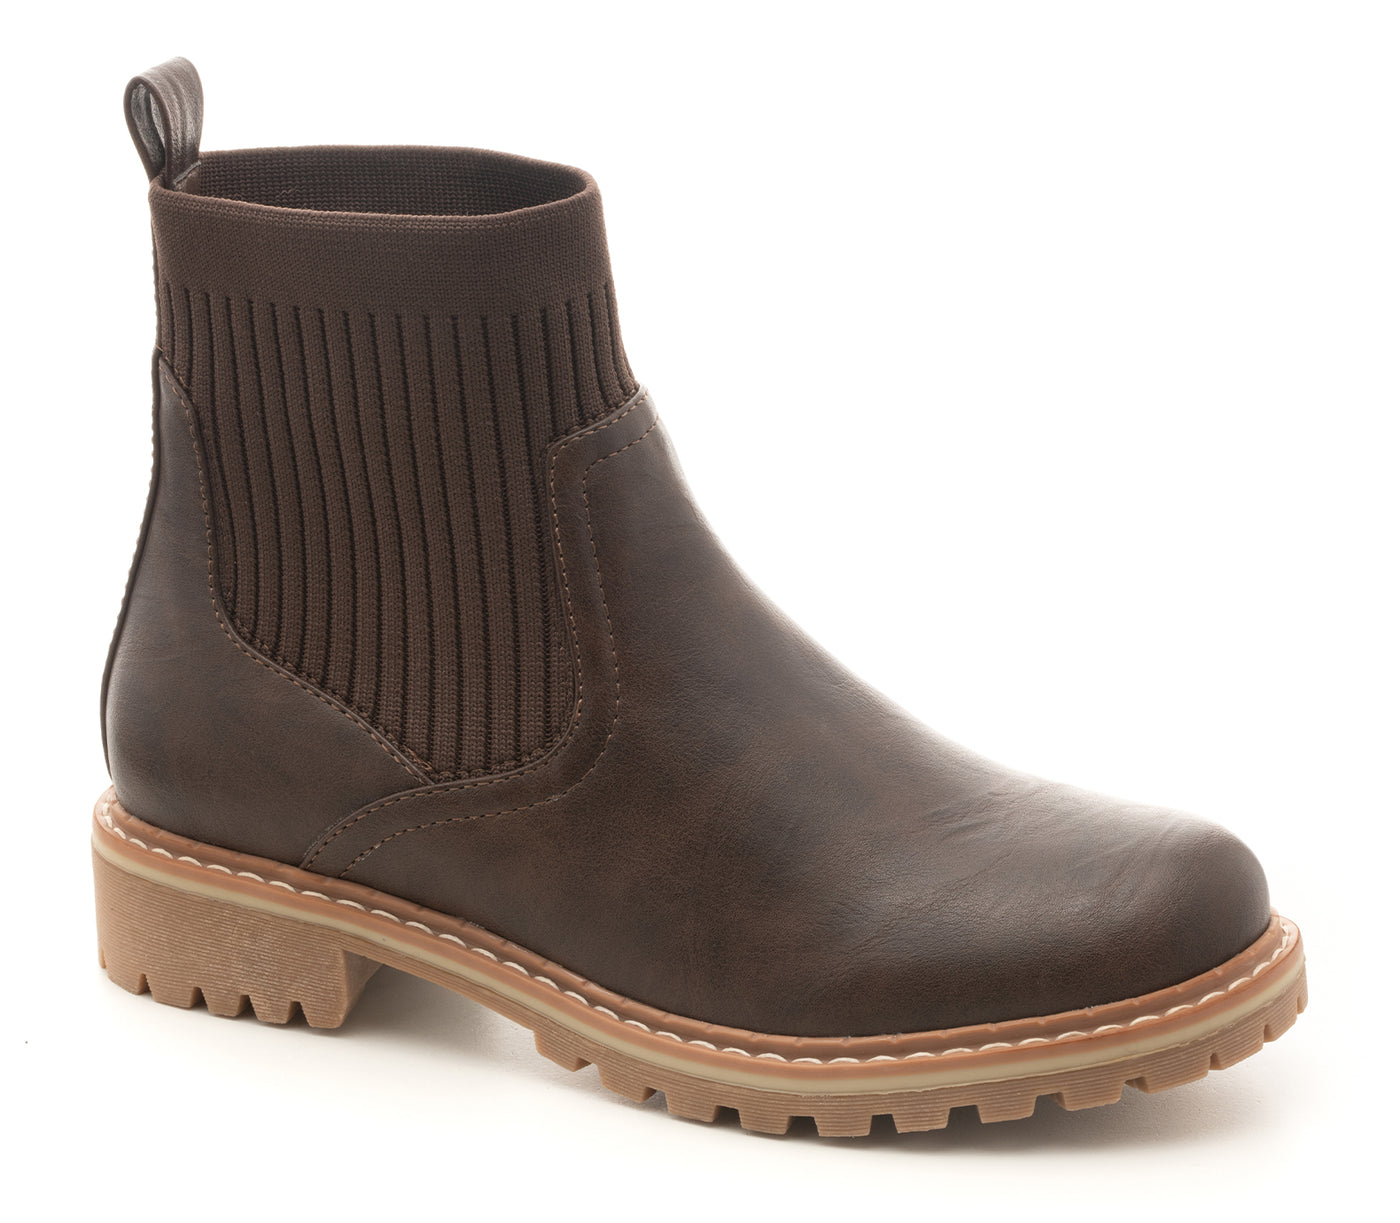 Corkys Cabin Fever Boots in Brown